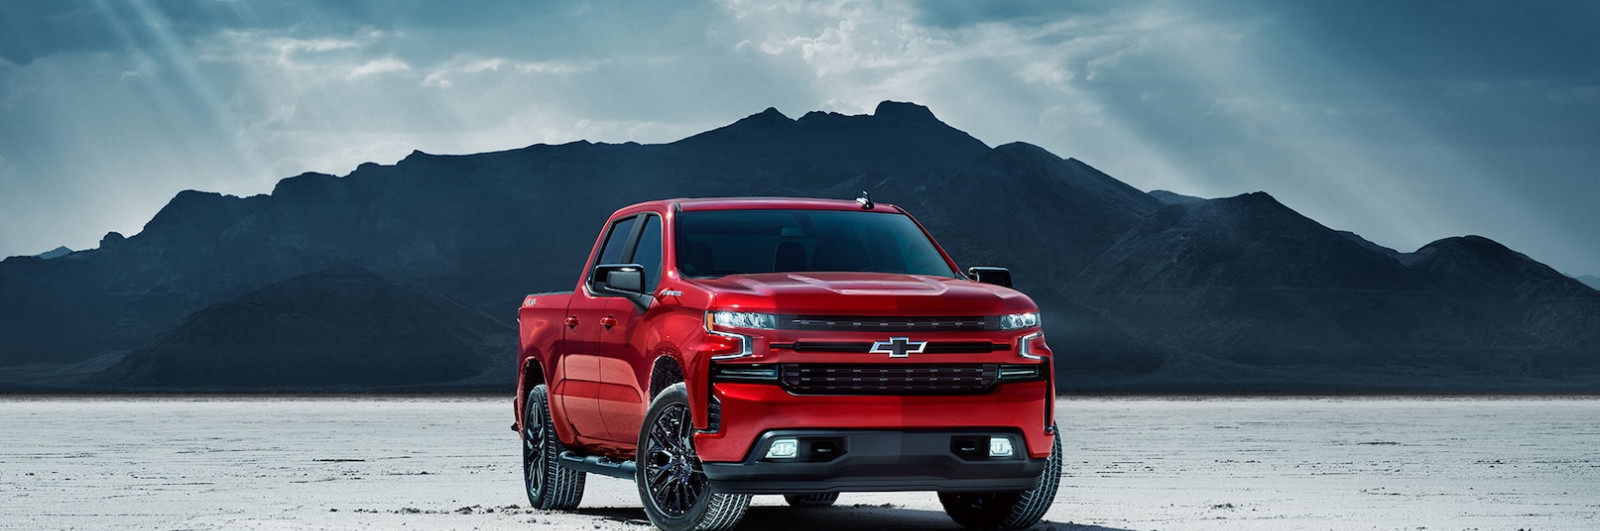 2019 Chevy 1500 Towing Capacity Chart